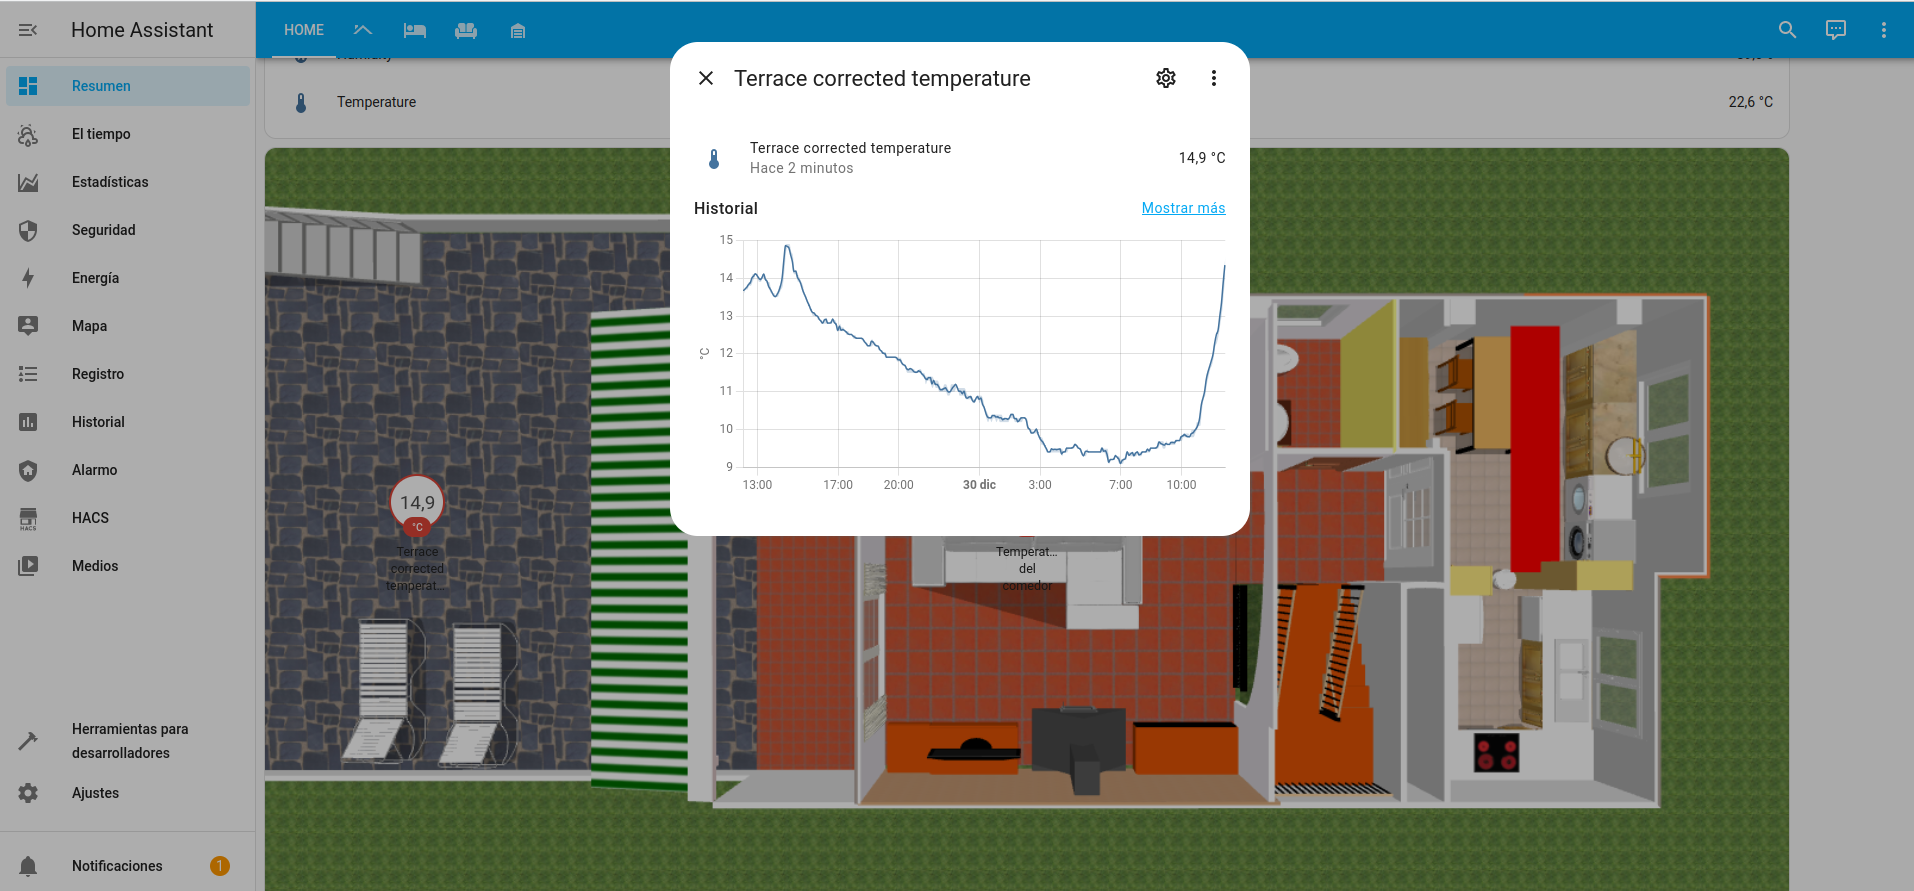 Home Assistant showing MeteoHome data